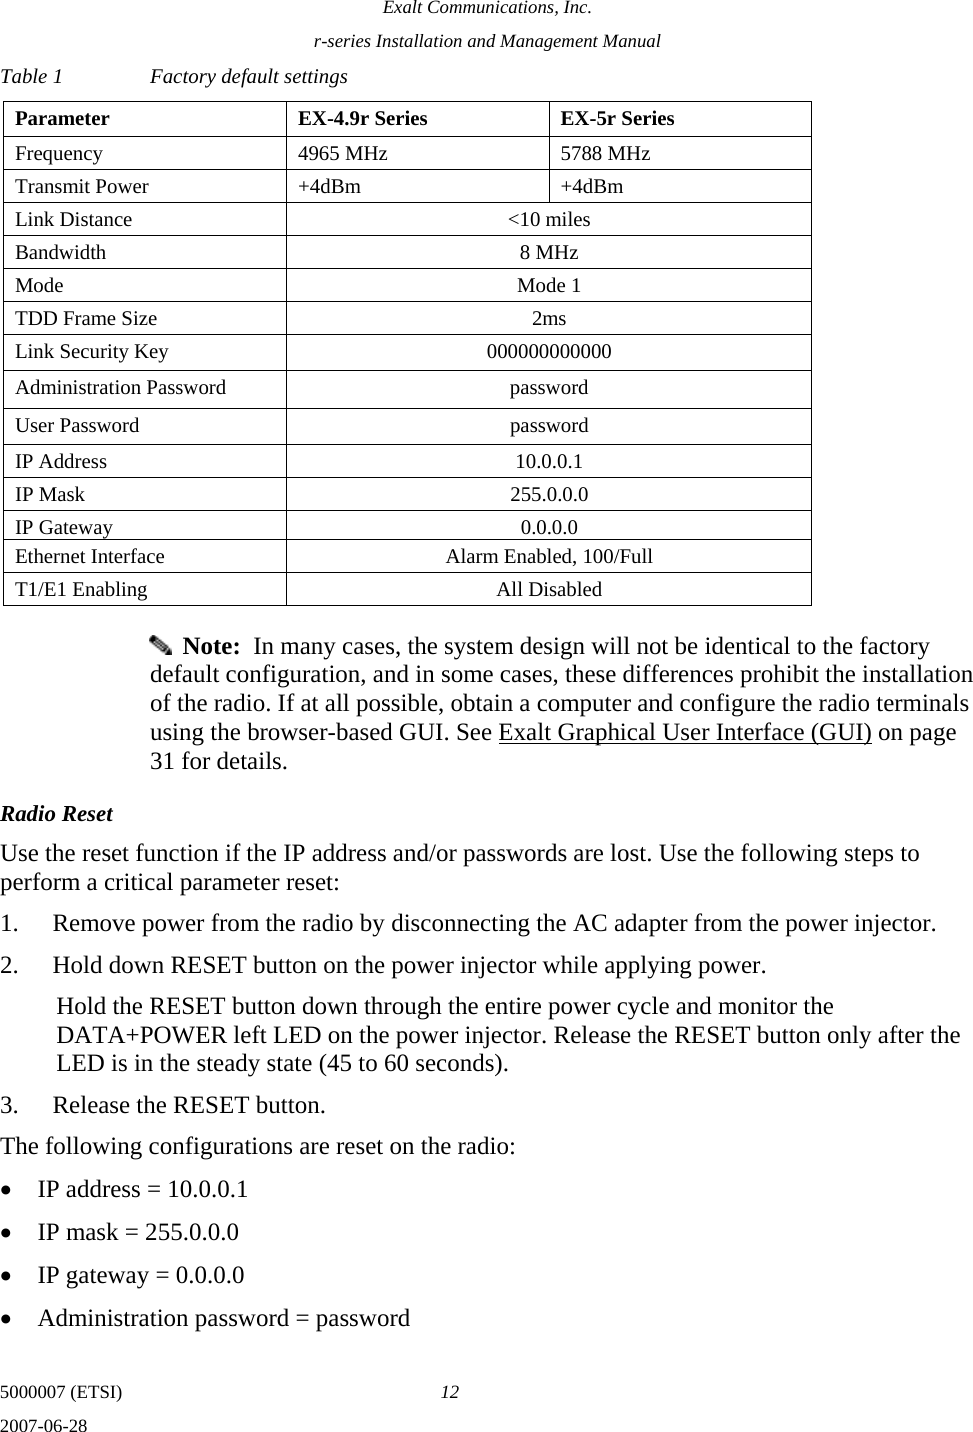 Exalt Communications, Inc. r-series Installation and Management Manual 5000007 (ETSI)  12 2007-06-28  Table 1  Factory default settings Parameter  EX-4.9r Series  EX-5r Series Frequency  4965 MHz  5788 MHz Transmit Power  +4dBm  +4dBm Link Distance  &lt;10 miles Bandwidth 8 MHz Mode Mode 1 TDD Frame Size  2ms Link Security Key  000000000000 Administration Password  password User Password  password IP Address  10.0.0.1 IP Mask  255.0.0.0 IP Gateway  0.0.0.0 Ethernet Interface  Alarm Enabled, 100/Full T1/E1 Enabling  All Disabled   Note:  In many cases, the system design will not be identical to the factory default configuration, and in some cases, these differences prohibit the installation of the radio. If at all possible, obtain a computer and configure the radio terminals using the browser-based GUI. See Exalt Graphical User Interface (GUI) on page 31 for details. Radio Reset Use the reset function if the IP address and/or passwords are lost. Use the following steps to perform a critical parameter reset: 1. Remove power from the radio by disconnecting the AC adapter from the power injector. 2. Hold down RESET button on the power injector while applying power.  Hold the RESET button down through the entire power cycle and monitor the DATA+POWER left LED on the power injector. Release the RESET button only after the LED is in the steady state (45 to 60 seconds). 3. Release the RESET button. The following configurations are reset on the radio: • IP address = 10.0.0.1 • IP mask = 255.0.0.0 • IP gateway = 0.0.0.0 • Administration password = password 